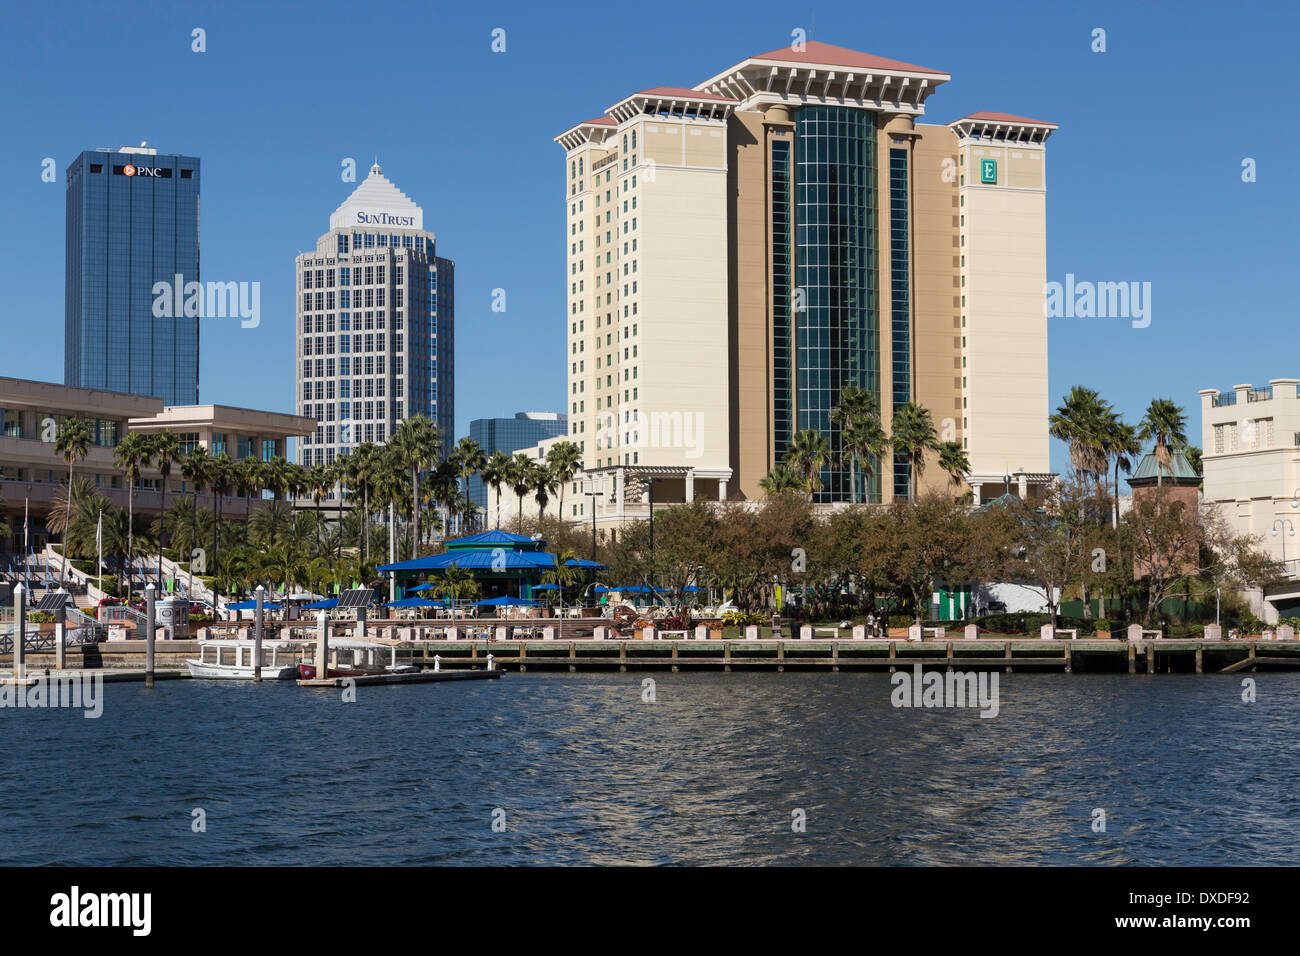 Embassy Suites Hotel and Hillsborough River, Tampa, FL Stock Photo